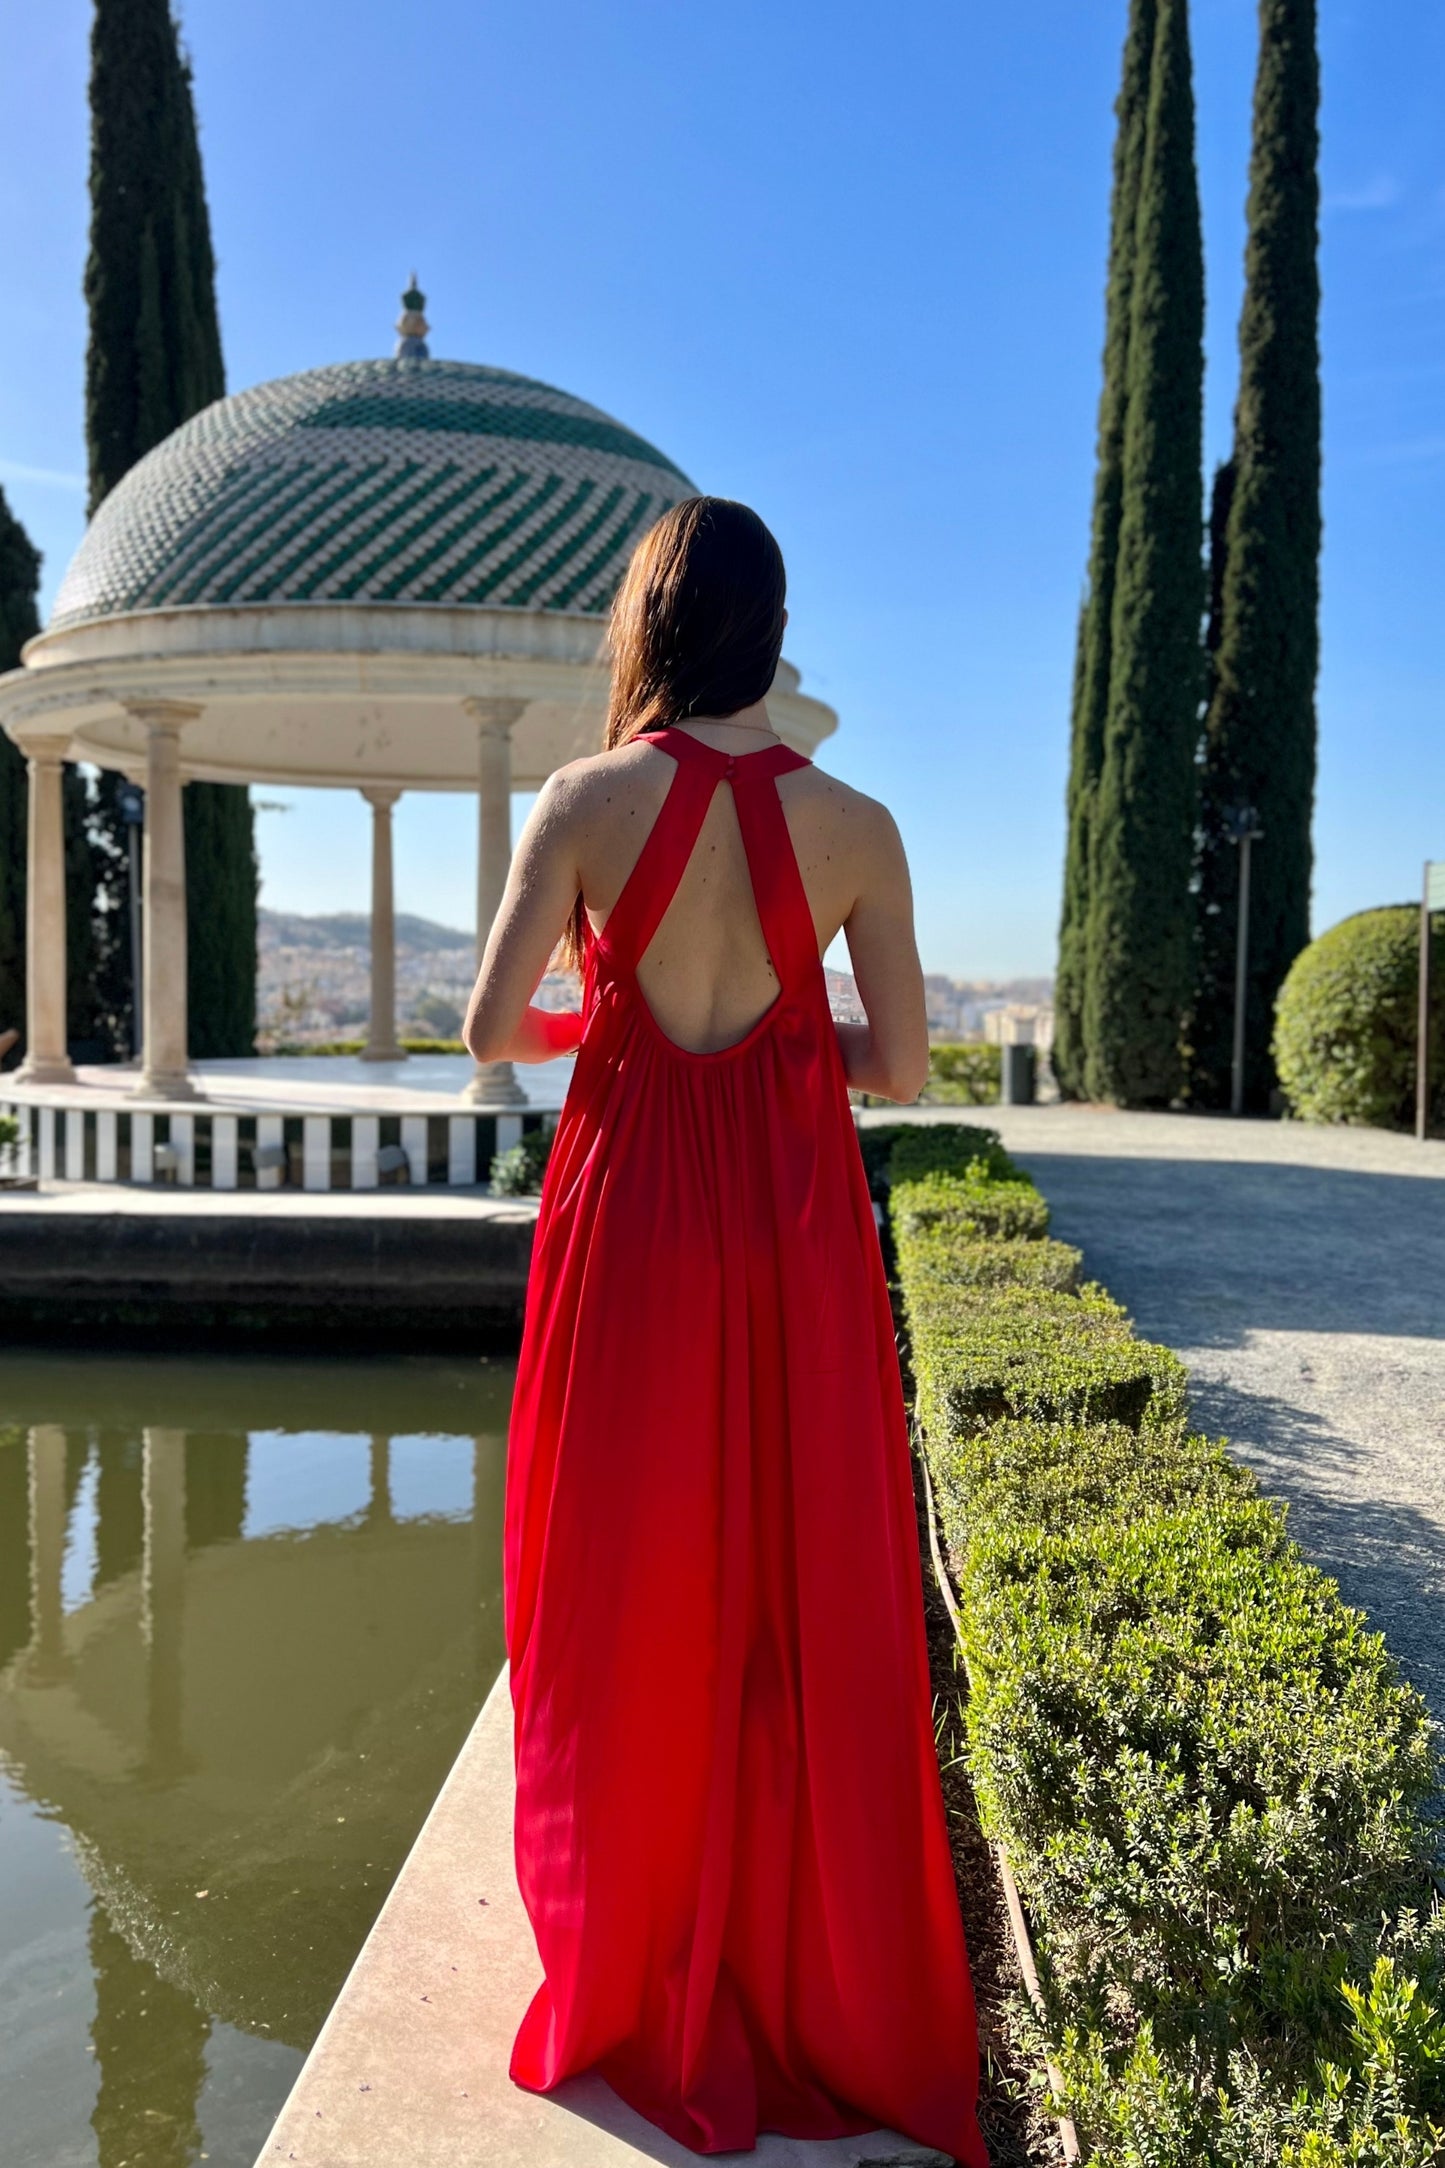 Red evening Dress long maxi dress with a bare back